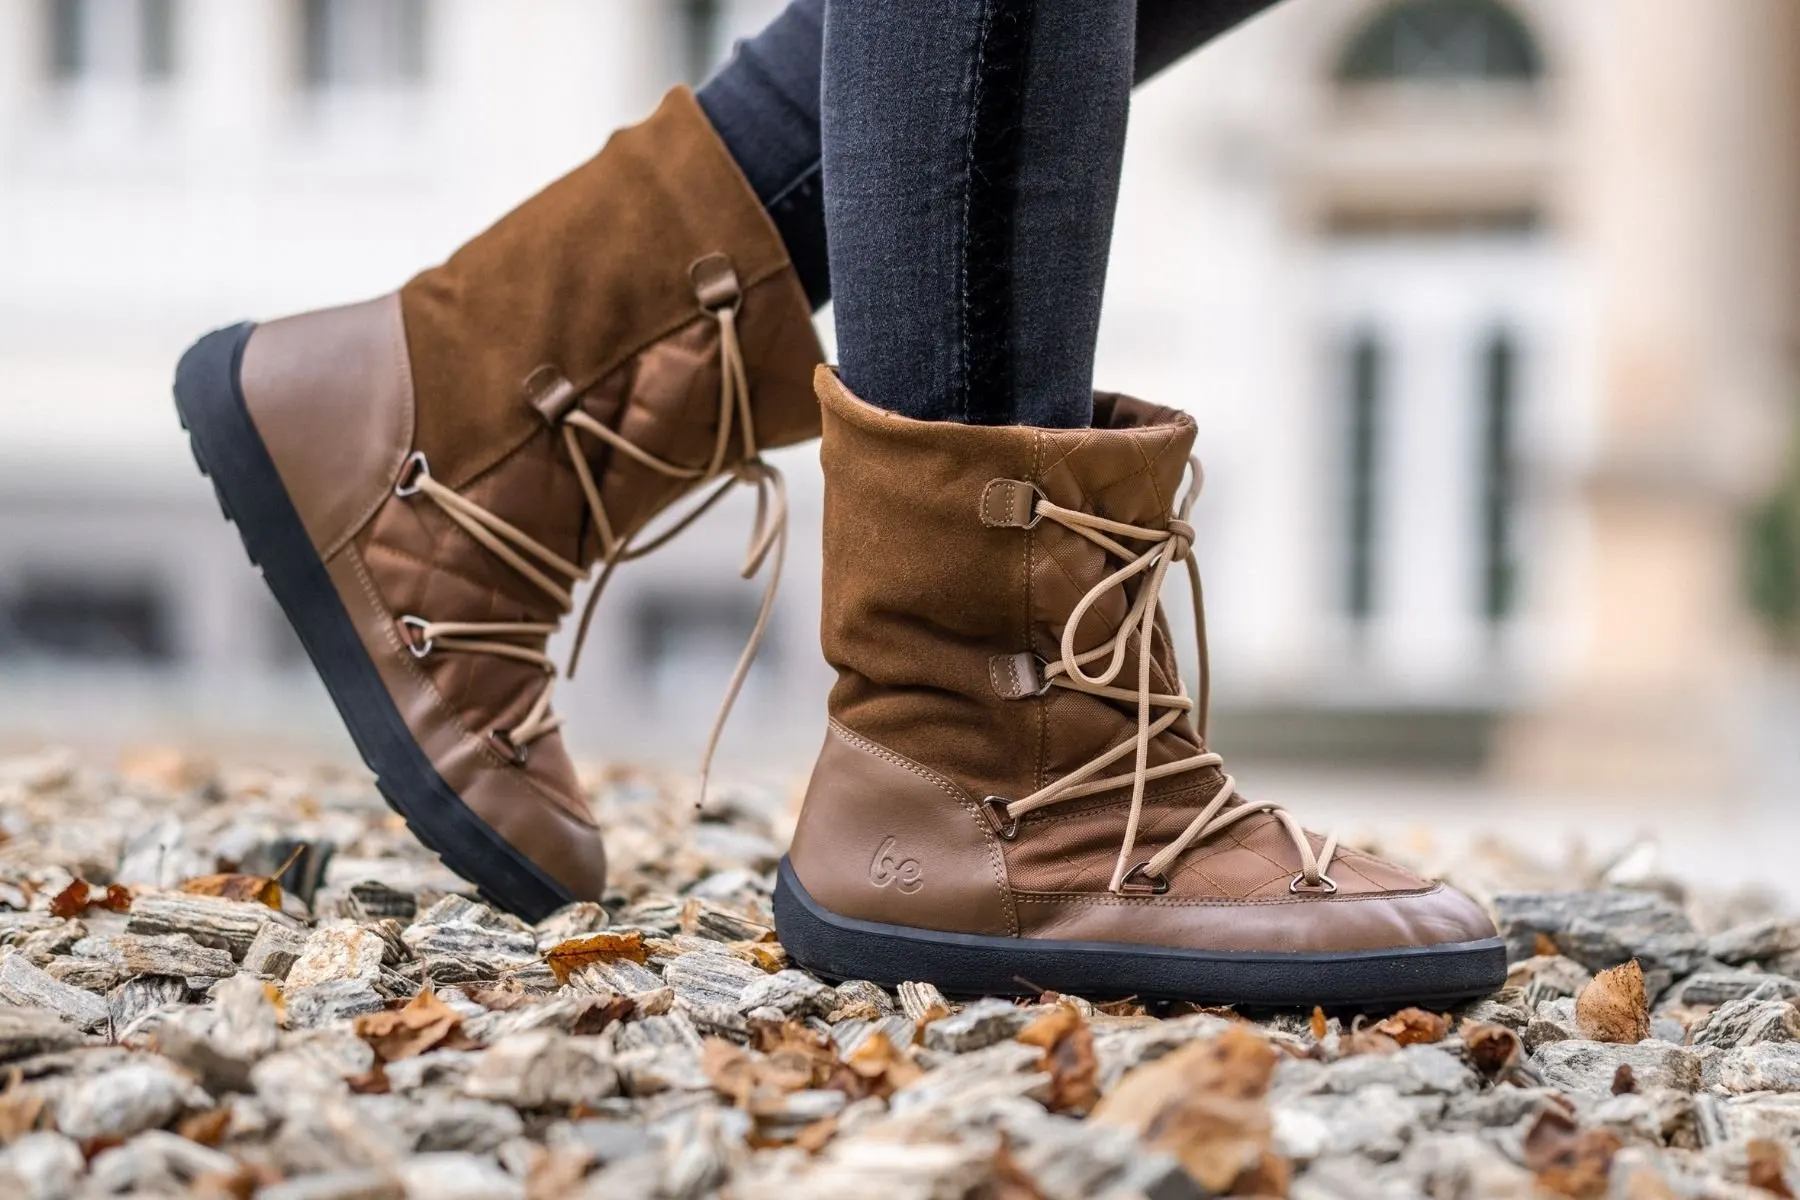 25 BEST Women's Winter Boots: Cute Snow Boots to Shop Now